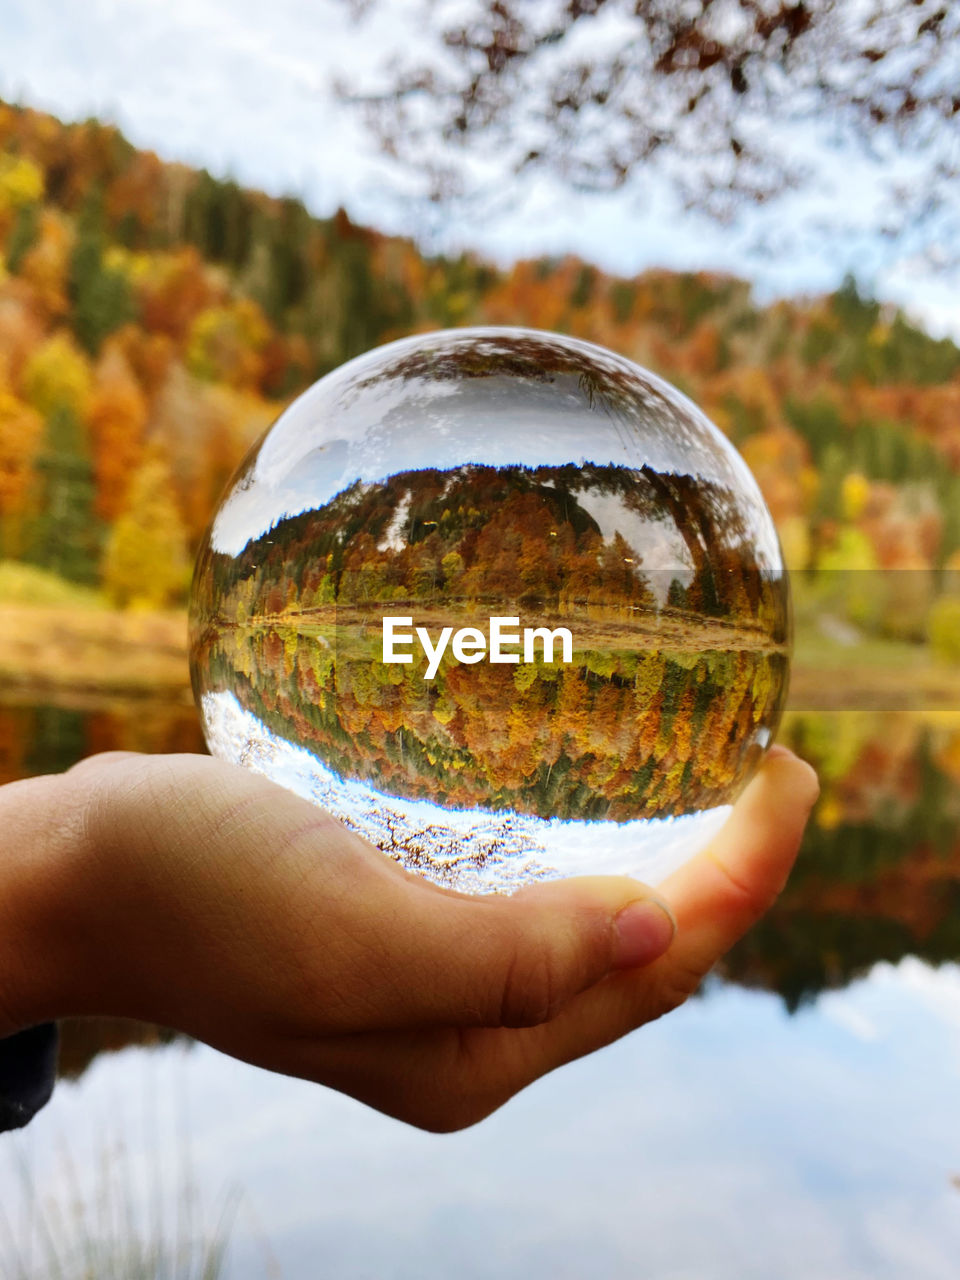 CLOSE-UP OF HAND HOLDING CRYSTAL BALL WITH REFLECTION OF TREES